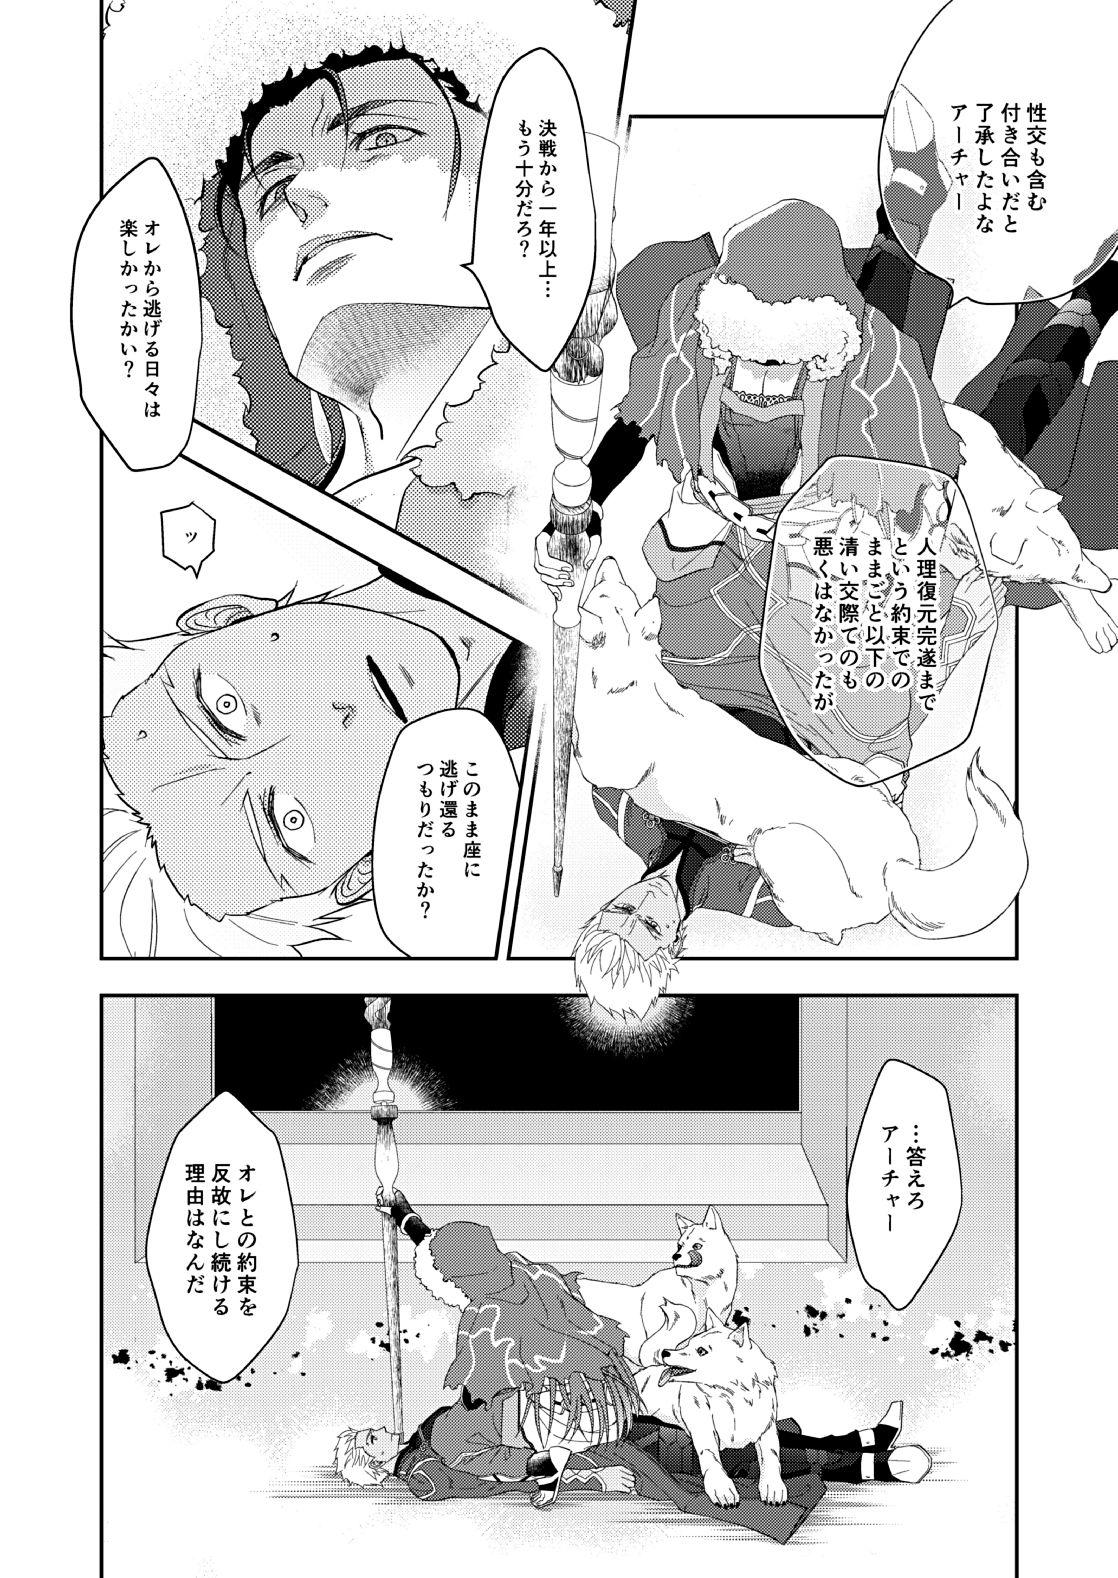 Piss deification - Fate grand order European - Page 8